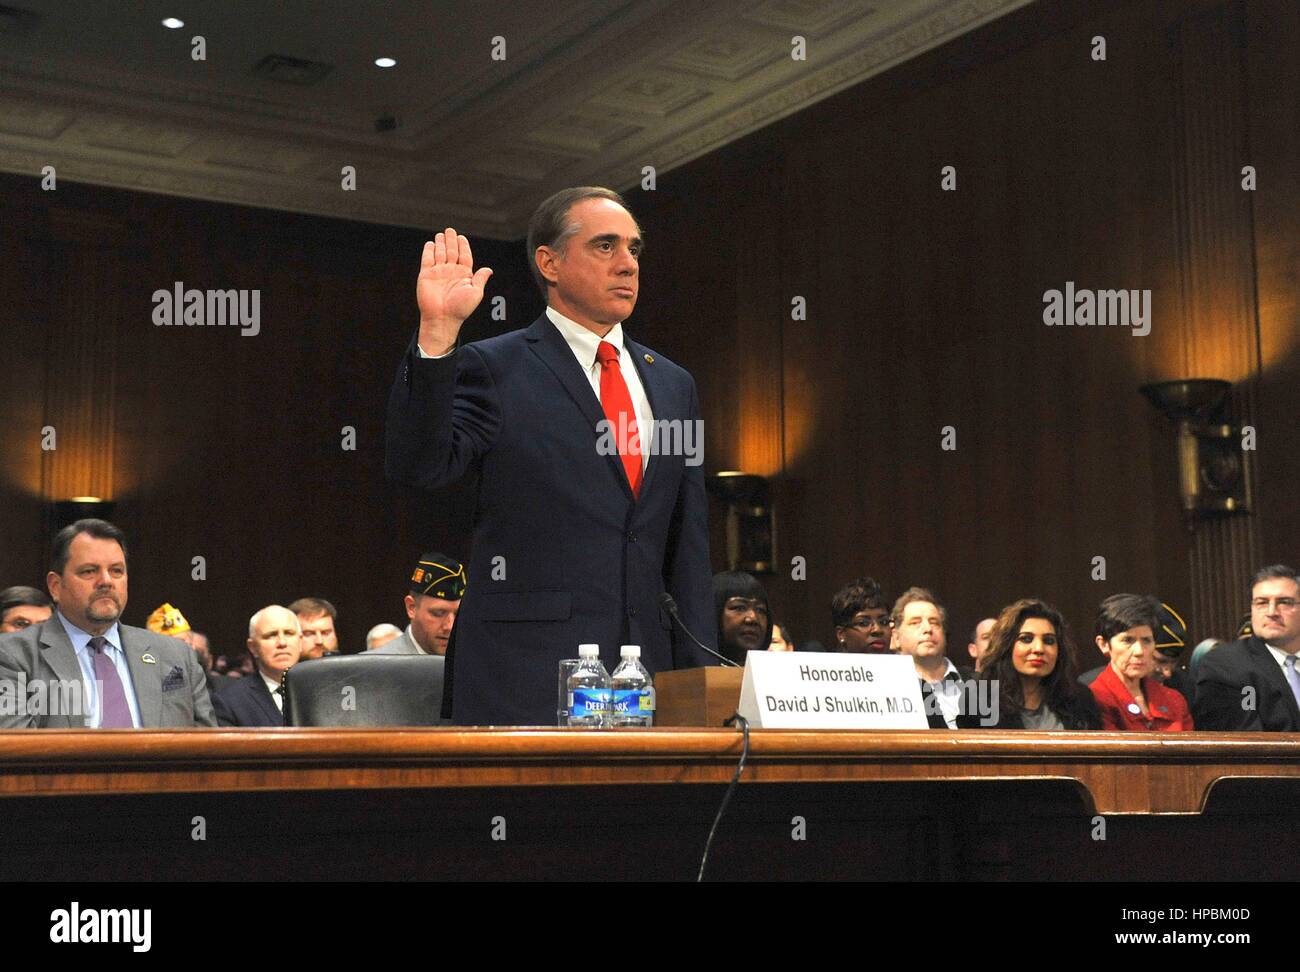 U.S. Under Secretary of Veterans Affairs Dr. David Shulkin is sworn in before testifying in the Senate Veterans Affairs Committee on his nomination as Secretary of the Department of Veterans Affairs February 1, 2017 in Washington, DC. Shulkin was confirmed as the new head of the Veterans Affairs administration by a unanimous vote. Stock Photo